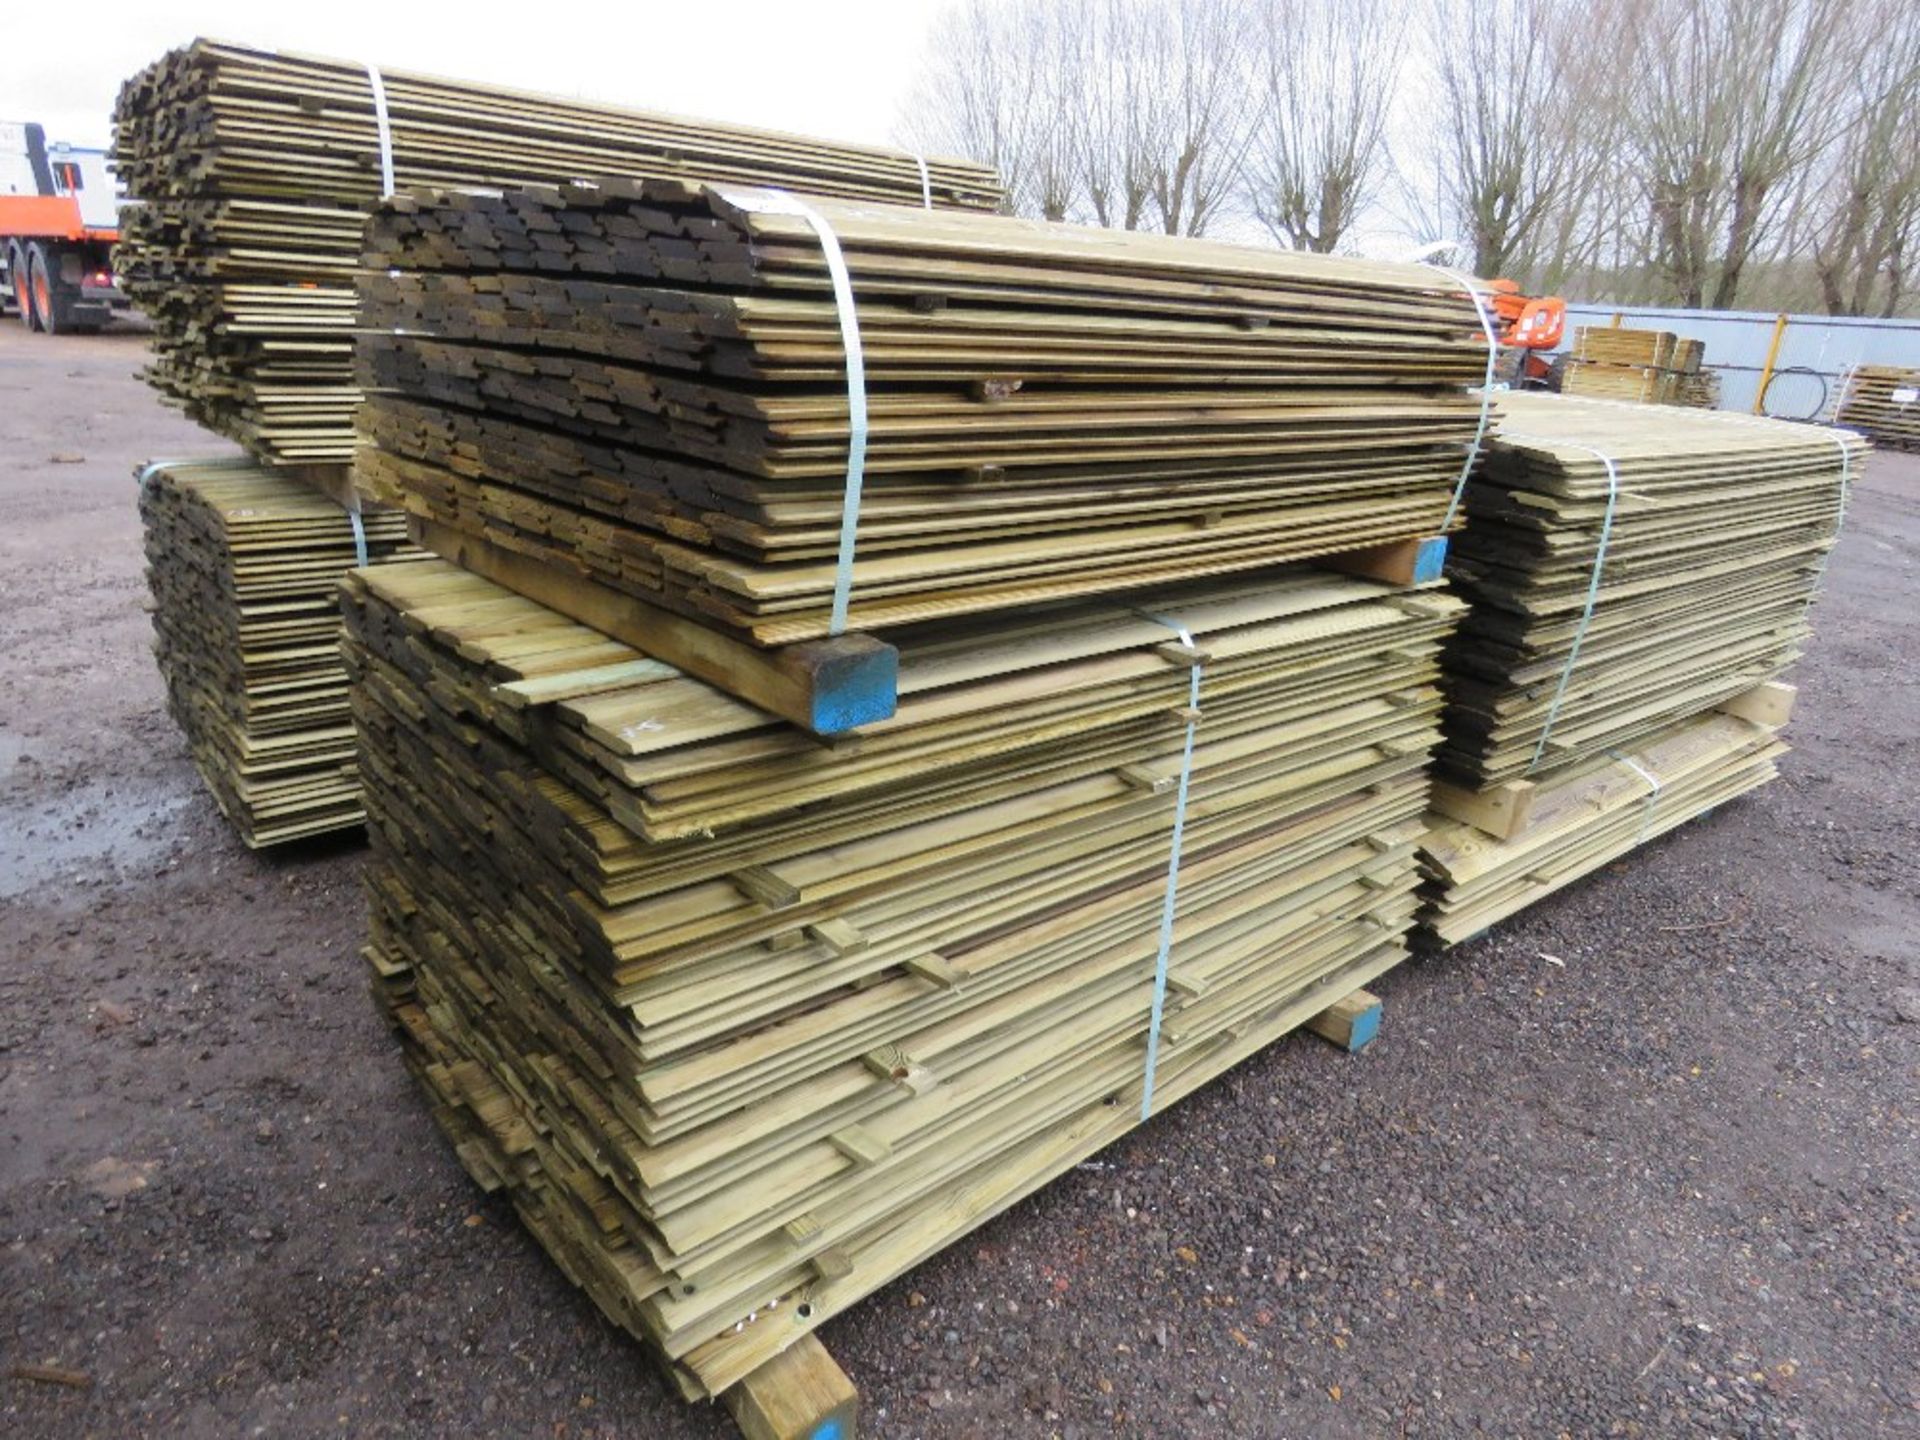 2 X PACKS OF TREATED SHIPLAP TIMBER CLADDING BOARDS: 1.42M AND 1.5M LENGTH X 100MM WIDTH APPROX. BIG